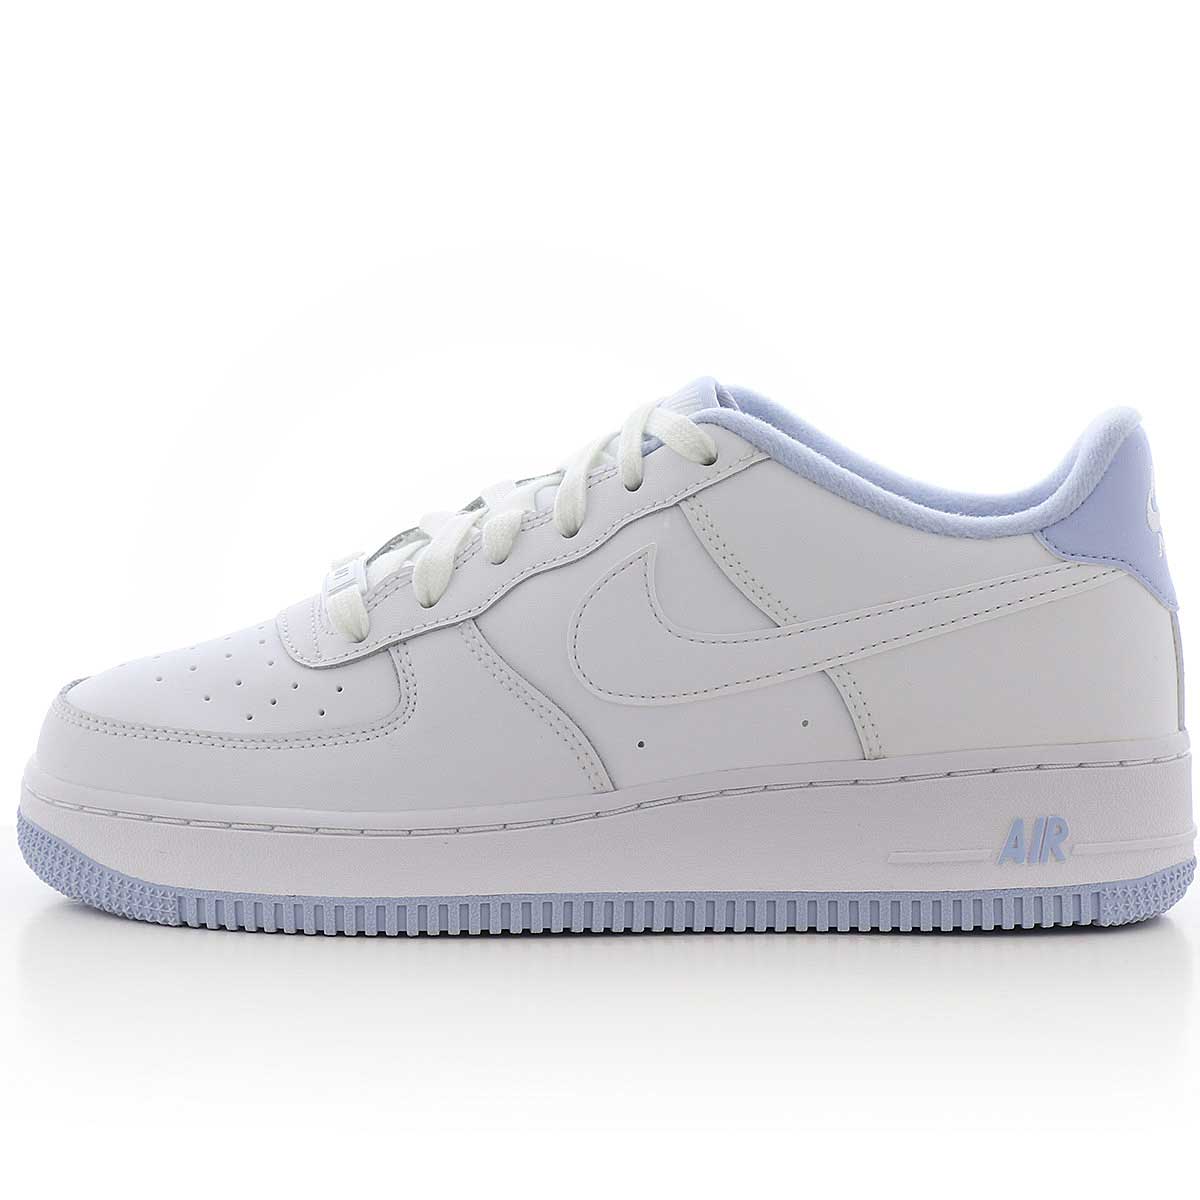 Buy AIR FORCE 1-1(GS) for N/A 0.0 on 